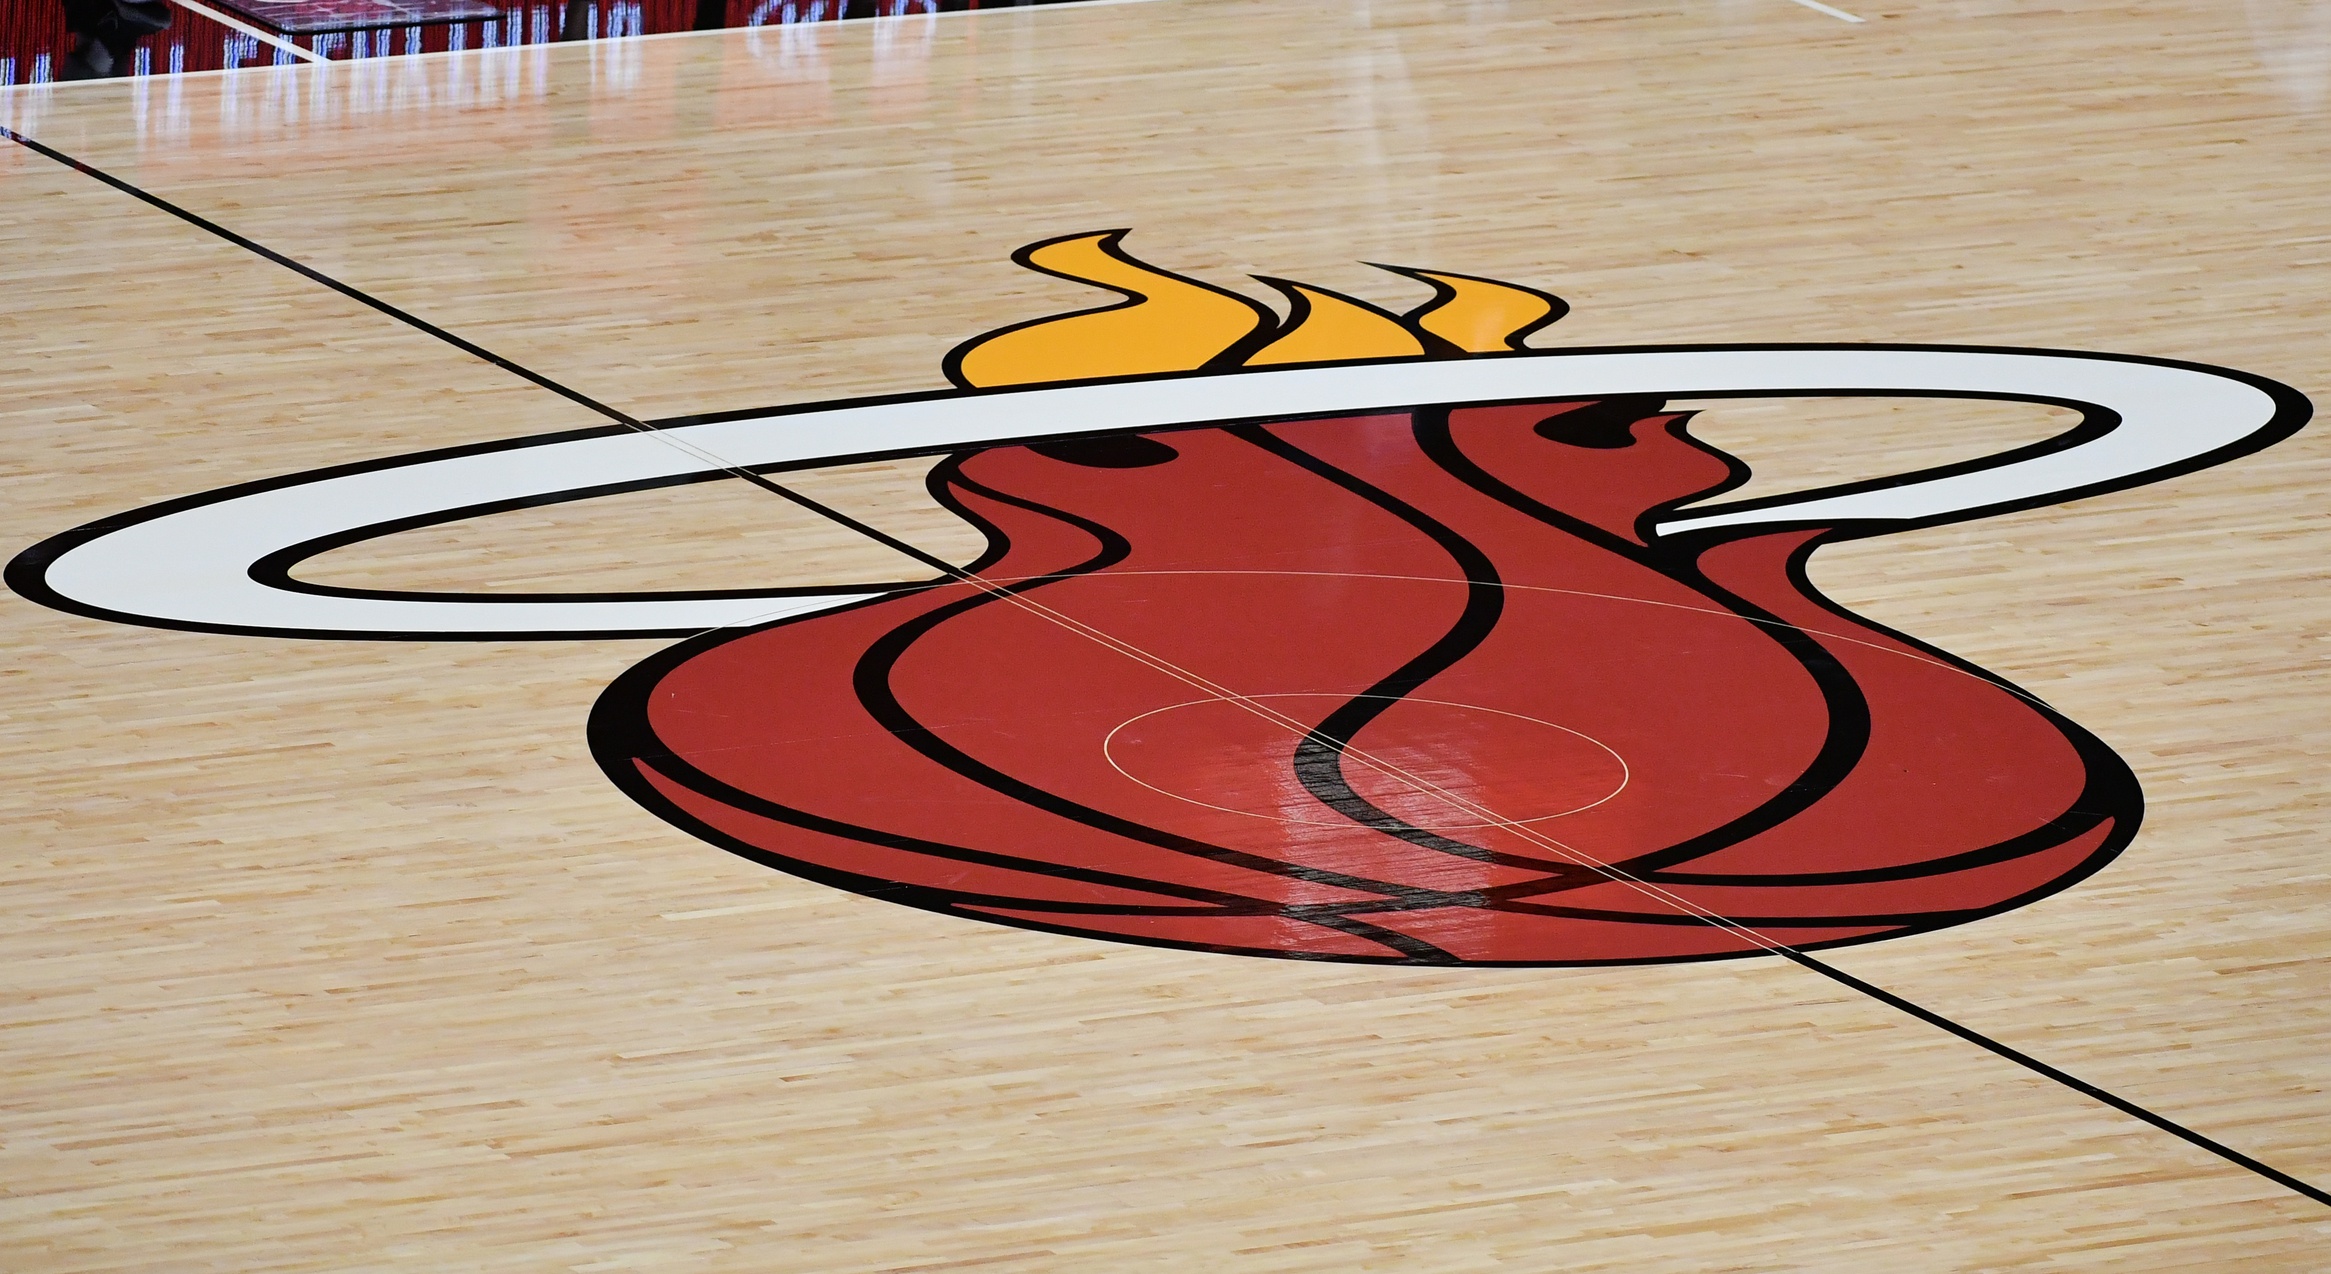 A general view of the Miami Heat logo mid court prior to the game between the Miami Heat and the New Orleans Pelicans at American Airlines Arena.